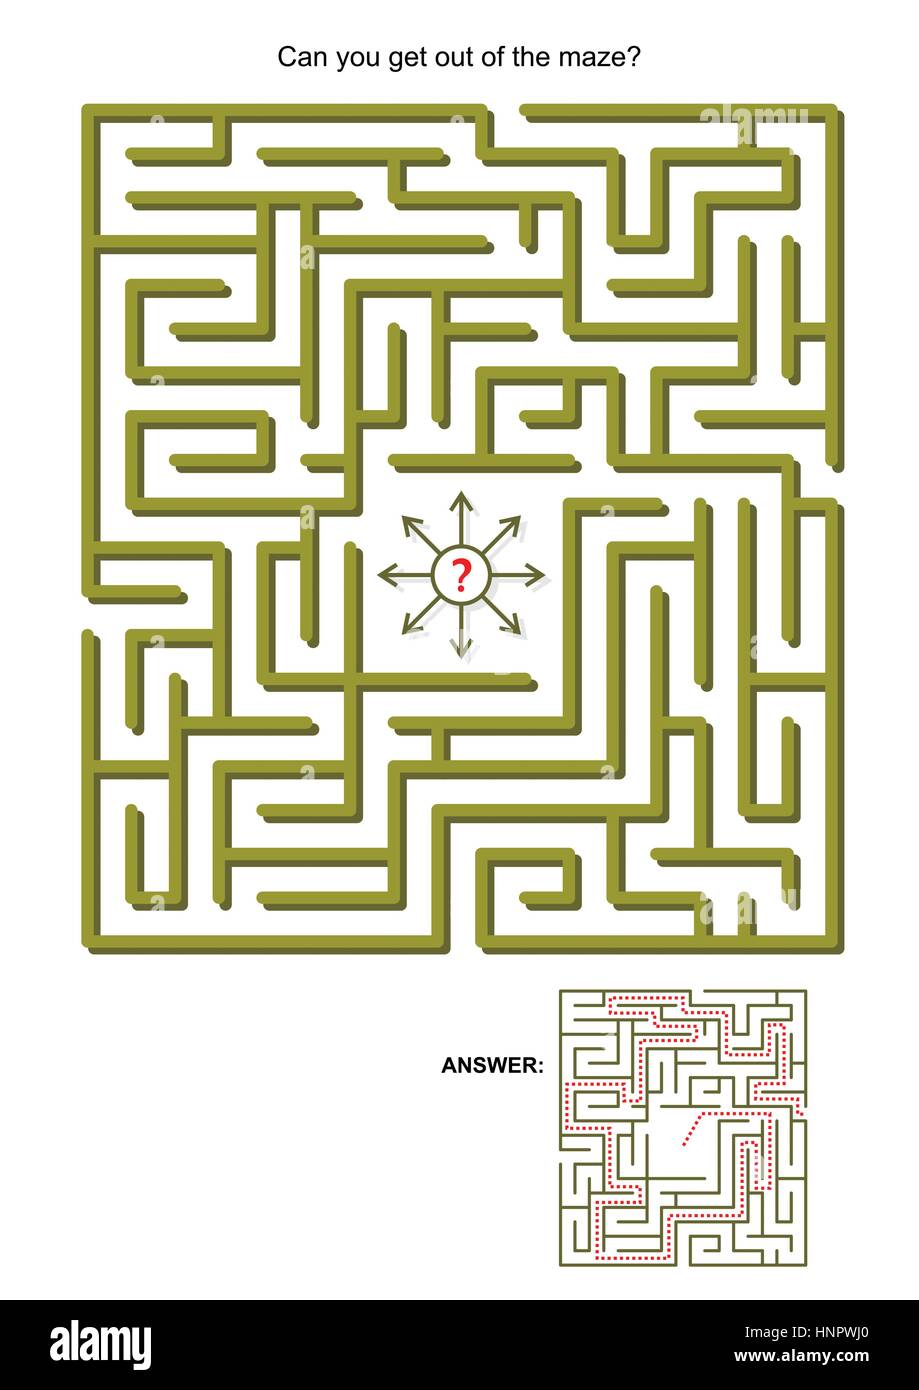 Maze game for kids or adults: Can you get out of the maze? Answers included. Stock Vector